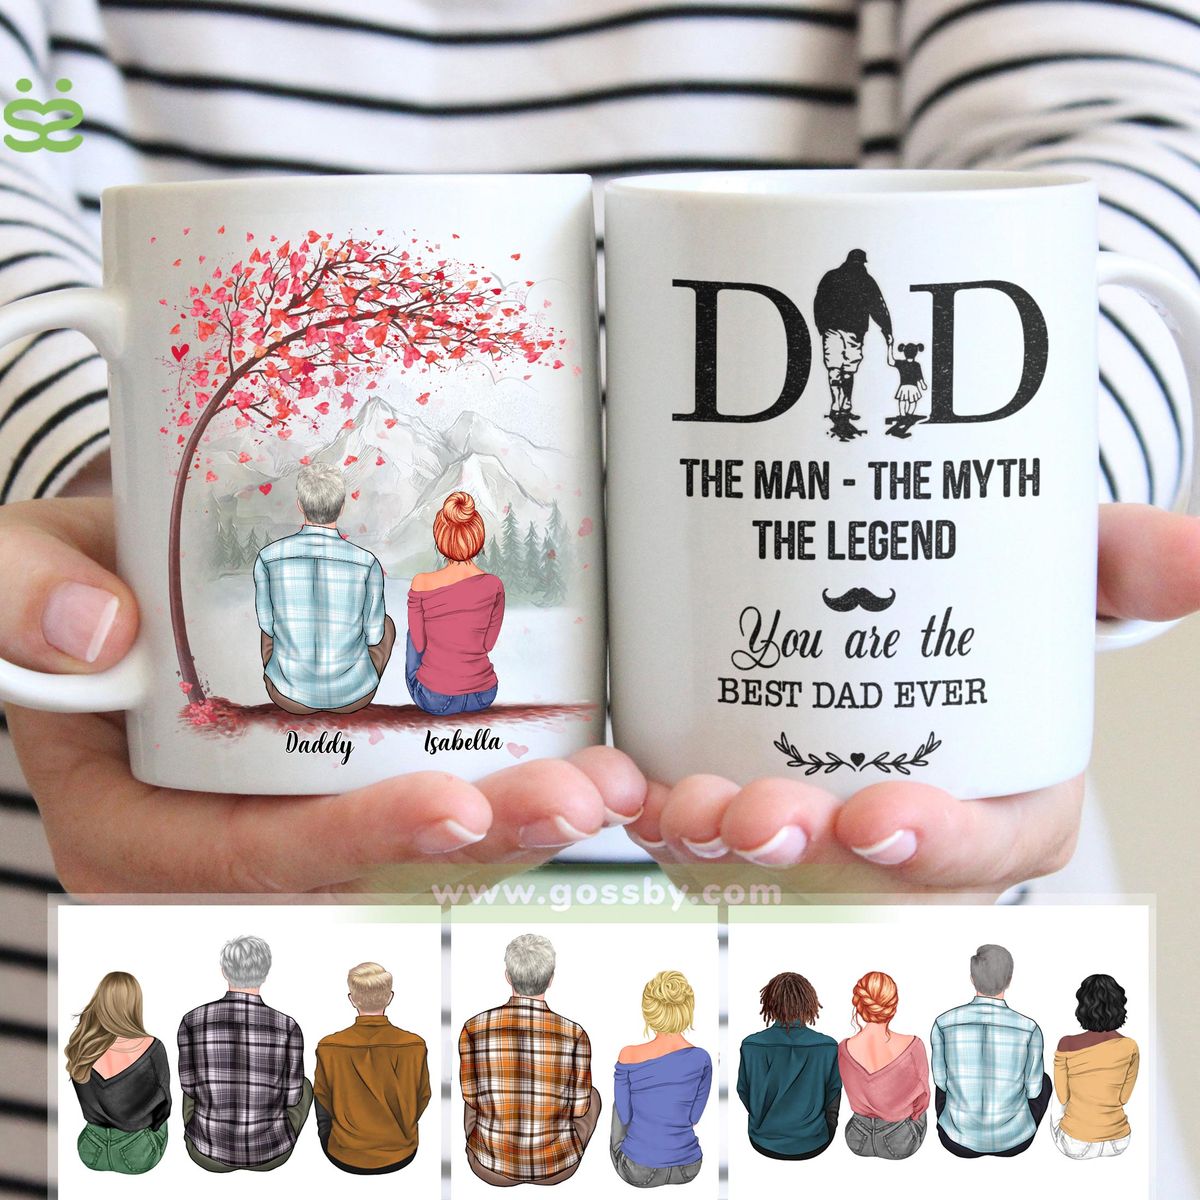 Personalized Mug - Dad & Children - Dad, The Man The Myth The Legend. You are the best Dad ever 1 - Mugs 1D